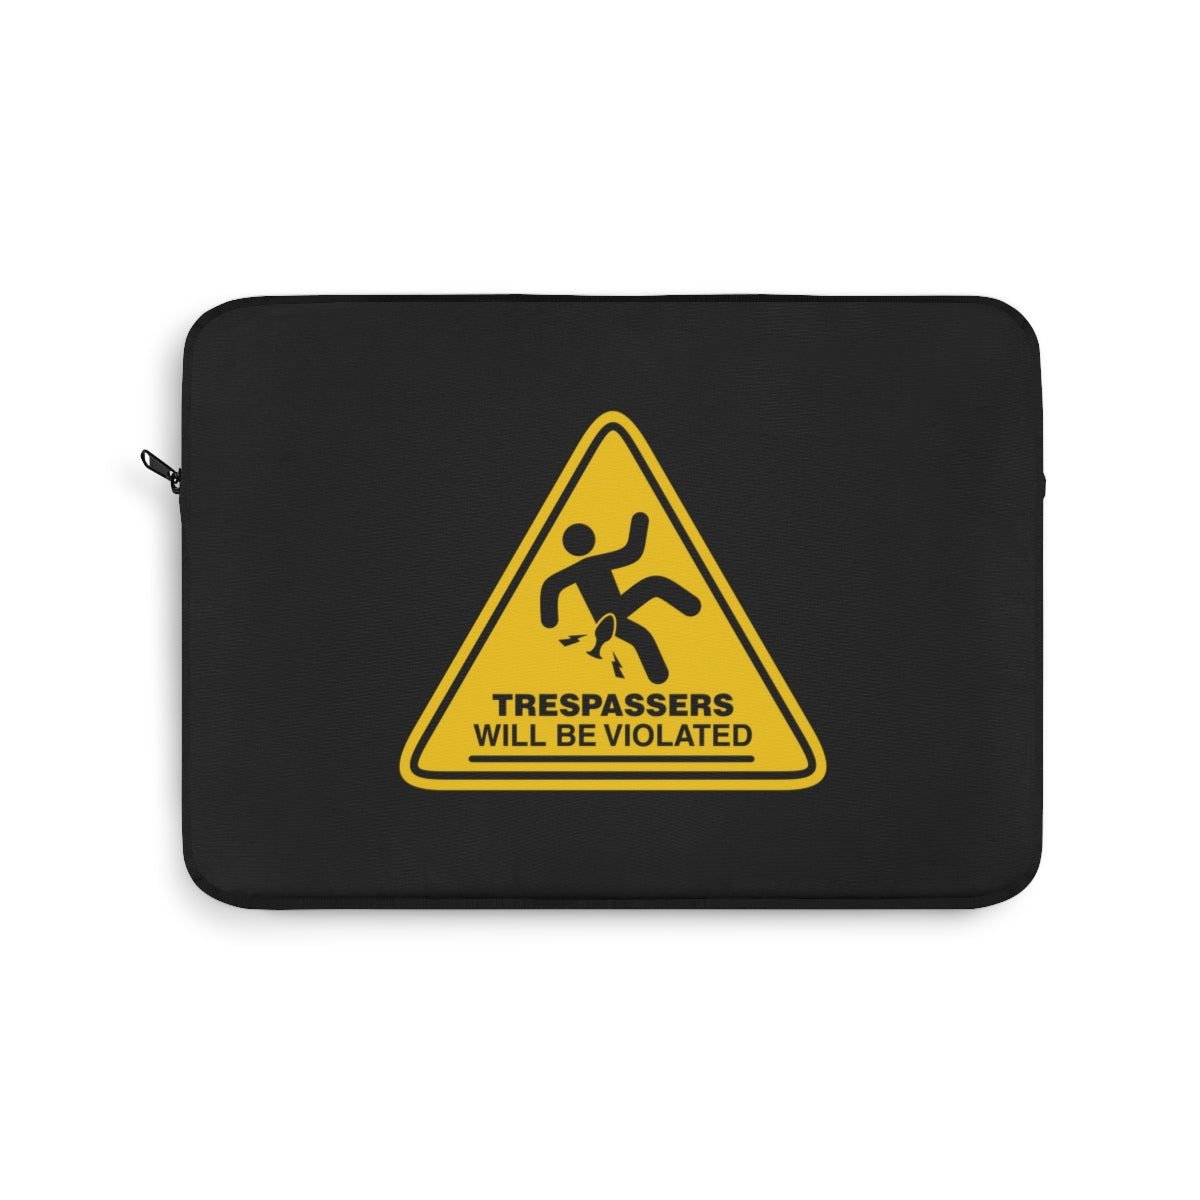 Trespassers Will Be Violated Laptop Sleeve